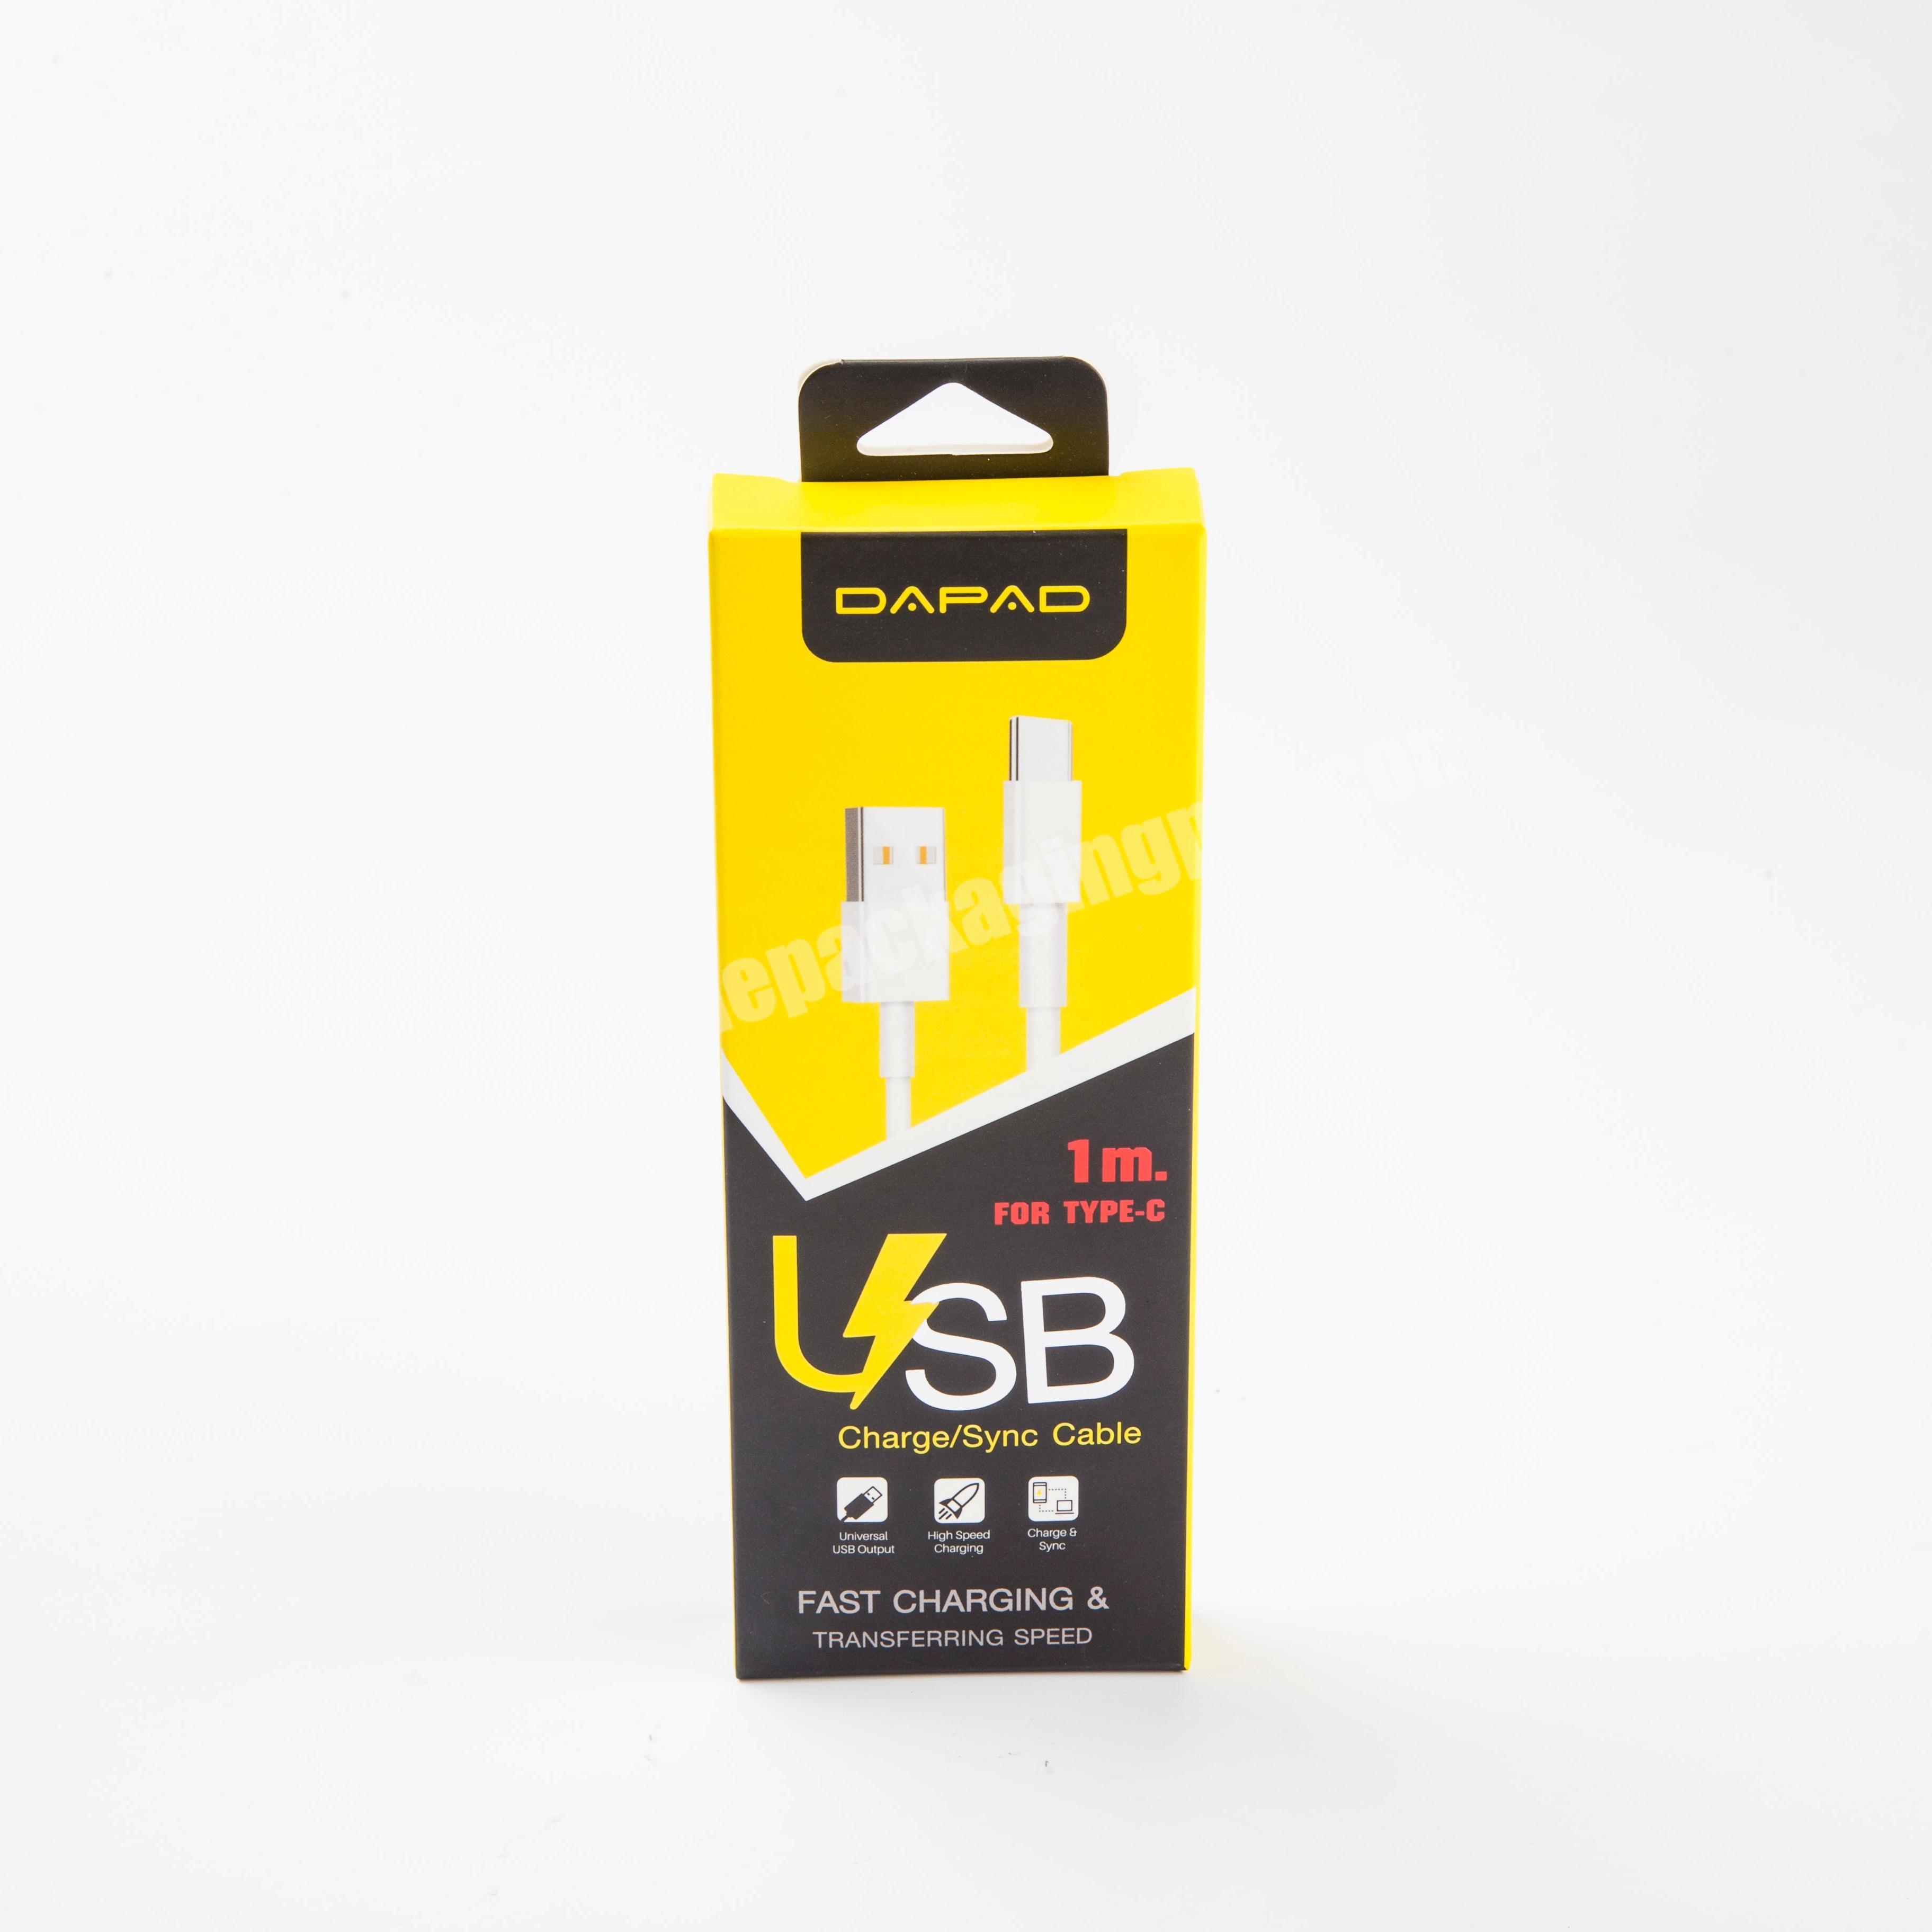 USB Cable packing box